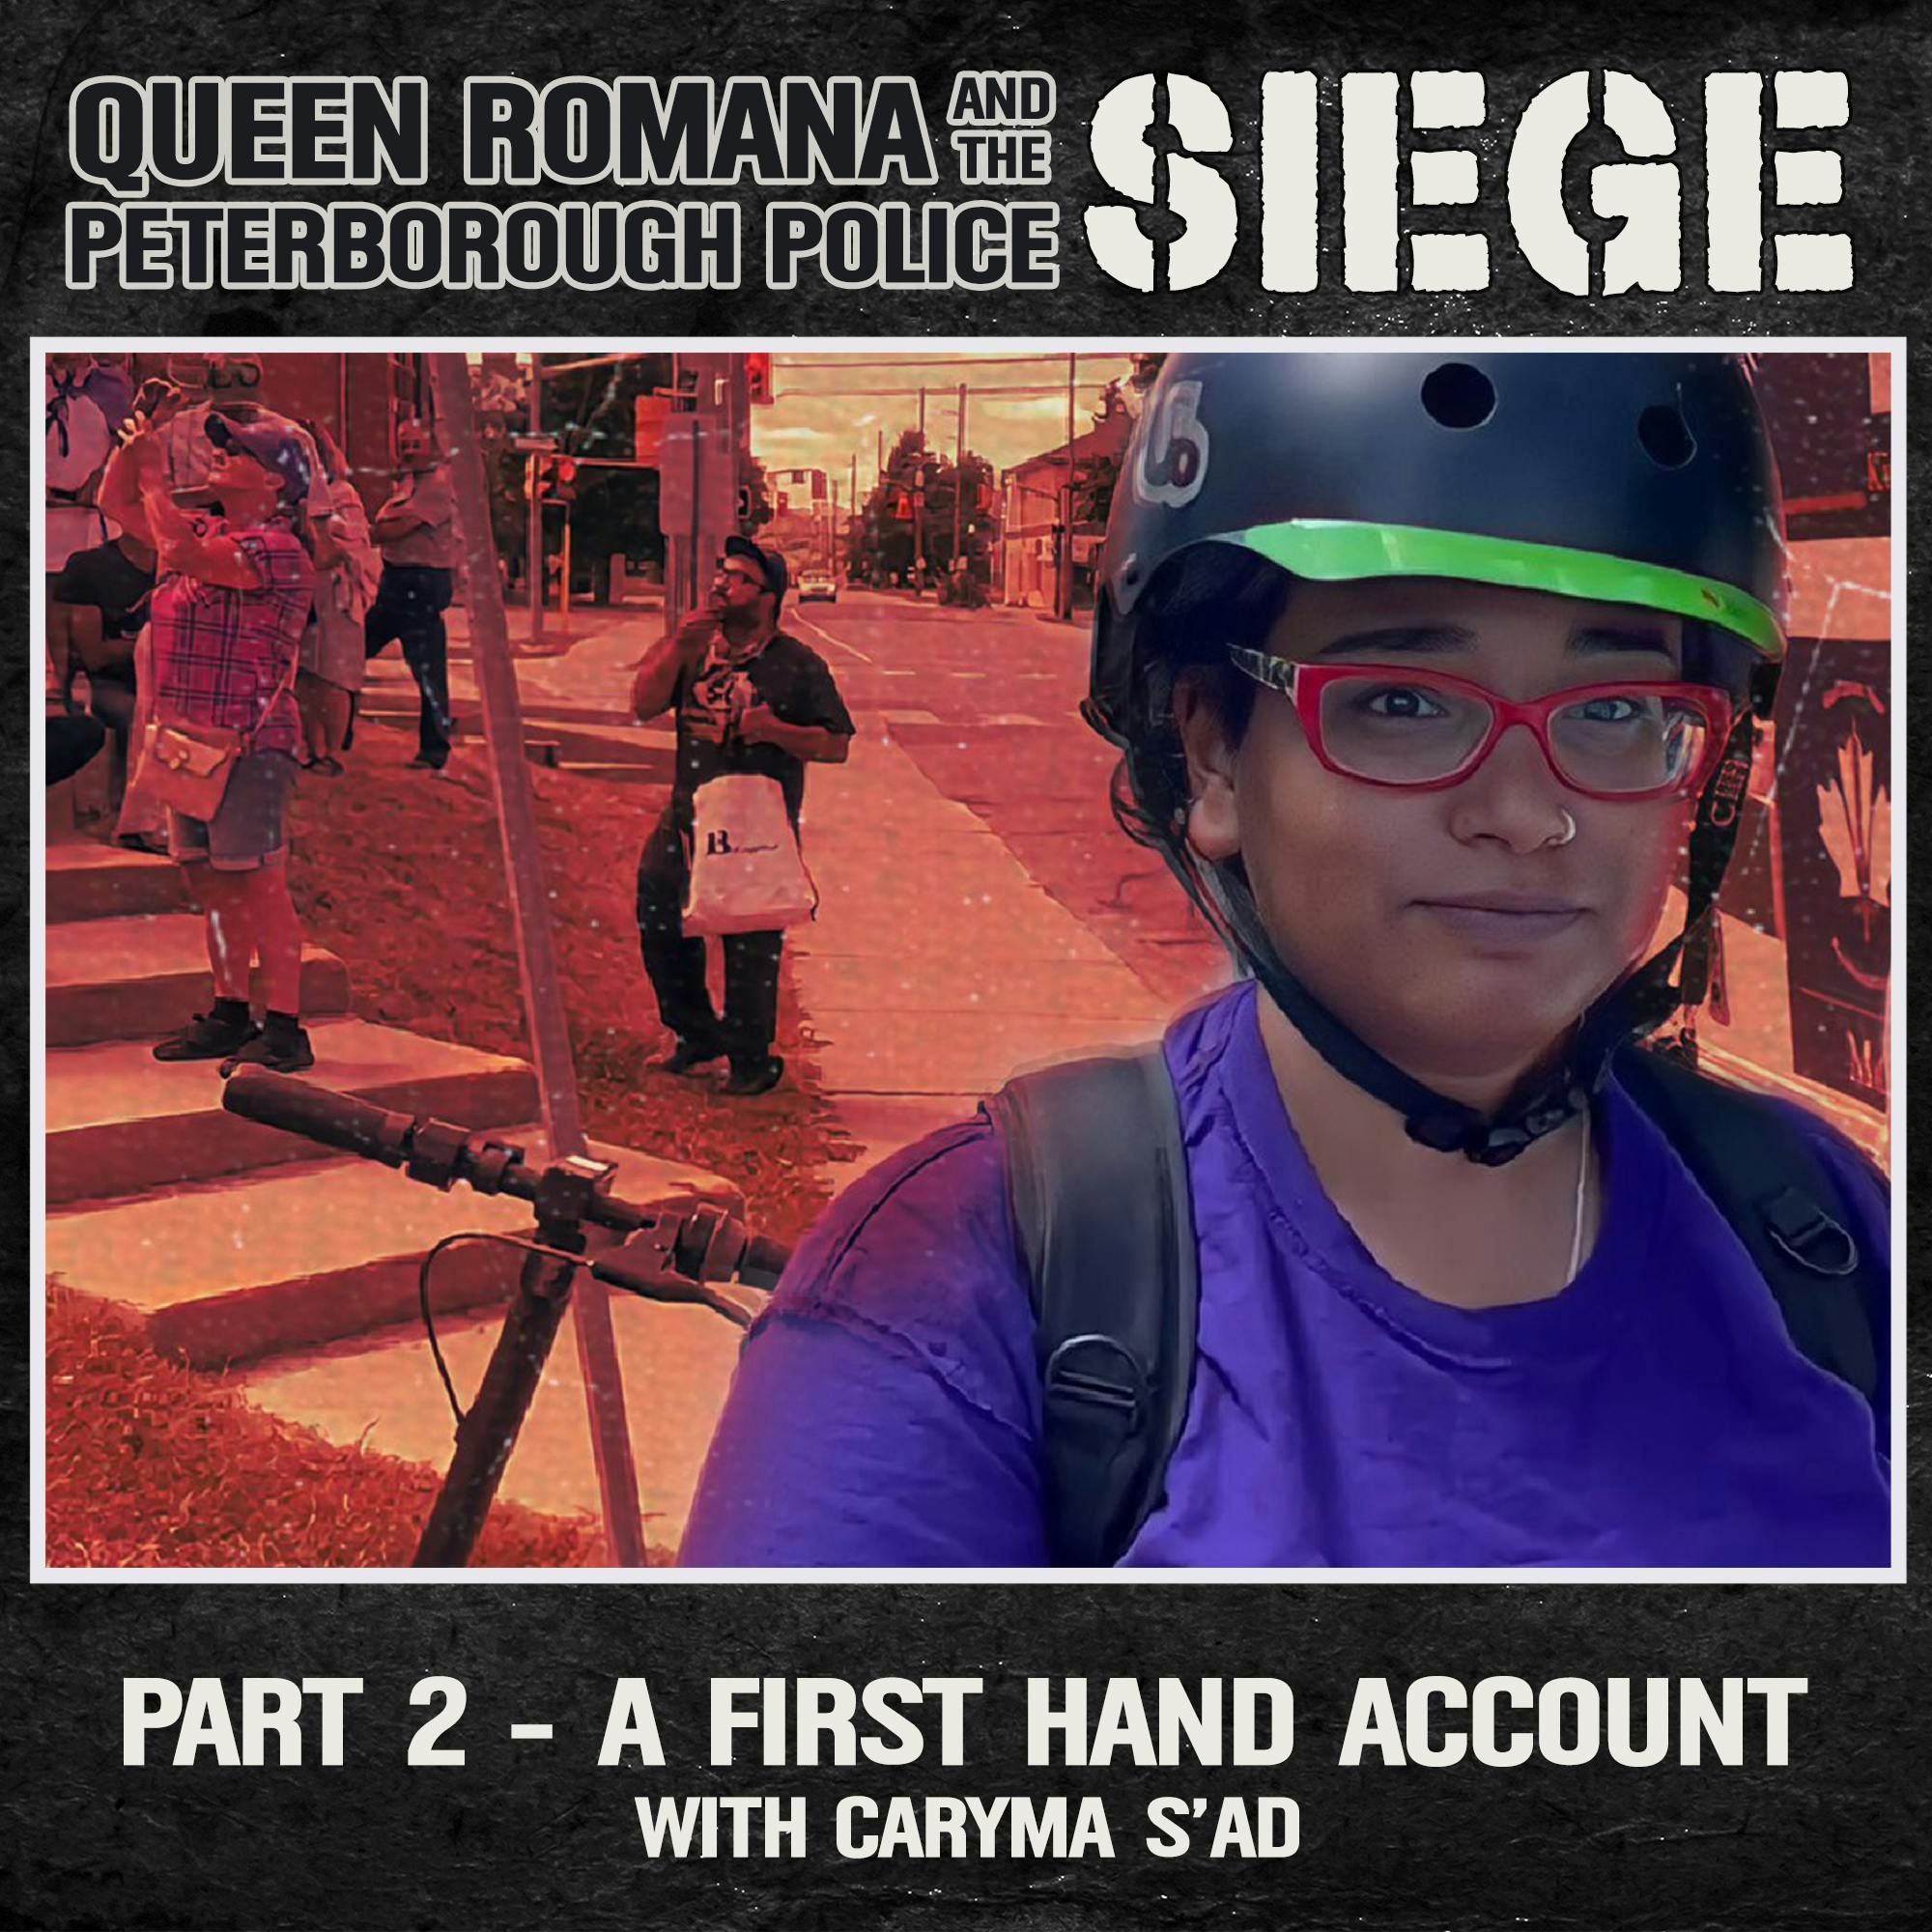 Queen Romana and the Peterborough Police Siege - 2 -  Caryma S'ad's First Hand Account